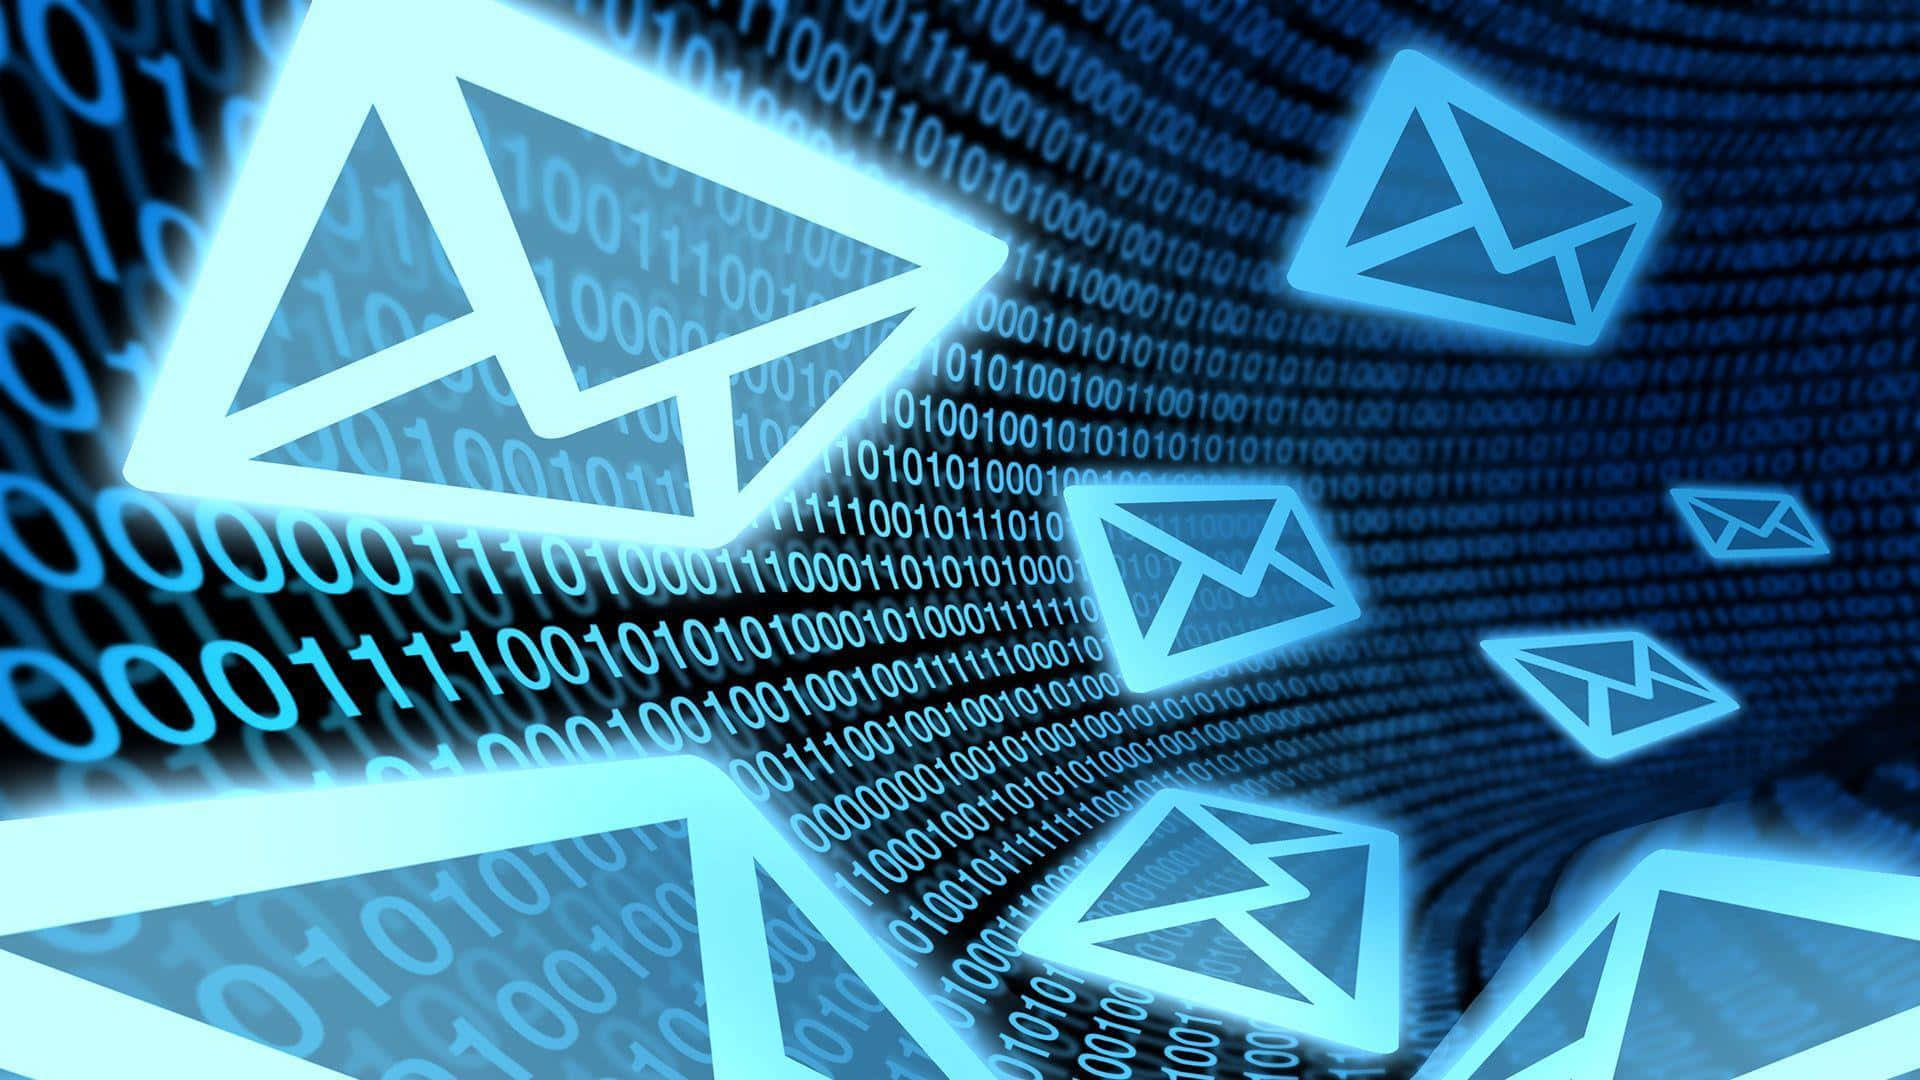 Email Marketing - The Future Of Email Marketing